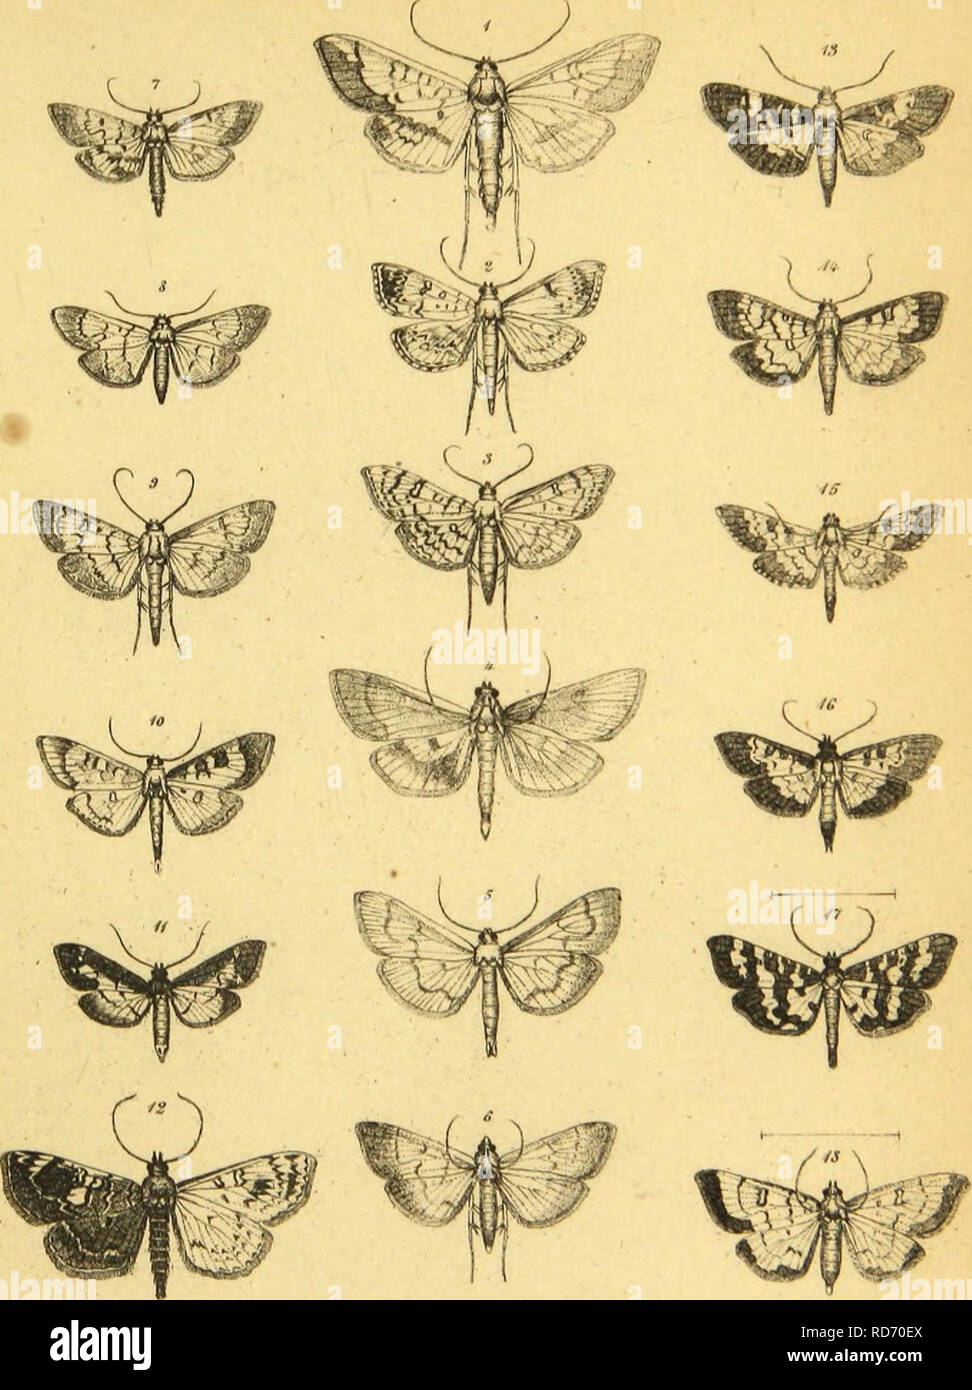 . Wiener entomologische Monatschrift. Insects; Entomology. Tiraer Kutan. lonatsffi: M H. Tilrl 11.. A;m,ftiit?u,itbr lu( . .rri-iitiliiu;ttlv /Â«â¢Â«/. OUtMÃ¤uaUf dum. l.itinilis I.i-.i sifÃ¼'tilhi* data, AwufftndiAr Stf. fluciuotatÃ¼- Ud S/HU't.t/.tttS l.fii. Ã¼tifUiirttilit Â»SÃT aqnuvaflr /**/â inittiiiinnlis thun. ifefttaftr /'i^- â¢ibntyitftilLi- Walter, ijraialÃ¼* T.at. â ' â â â. Please note that these images are extracted from scanned page images that may have been digitally enhanced for readability - coloration and appearance of these illustrations may not perfectly resemble the orig Stock Photo